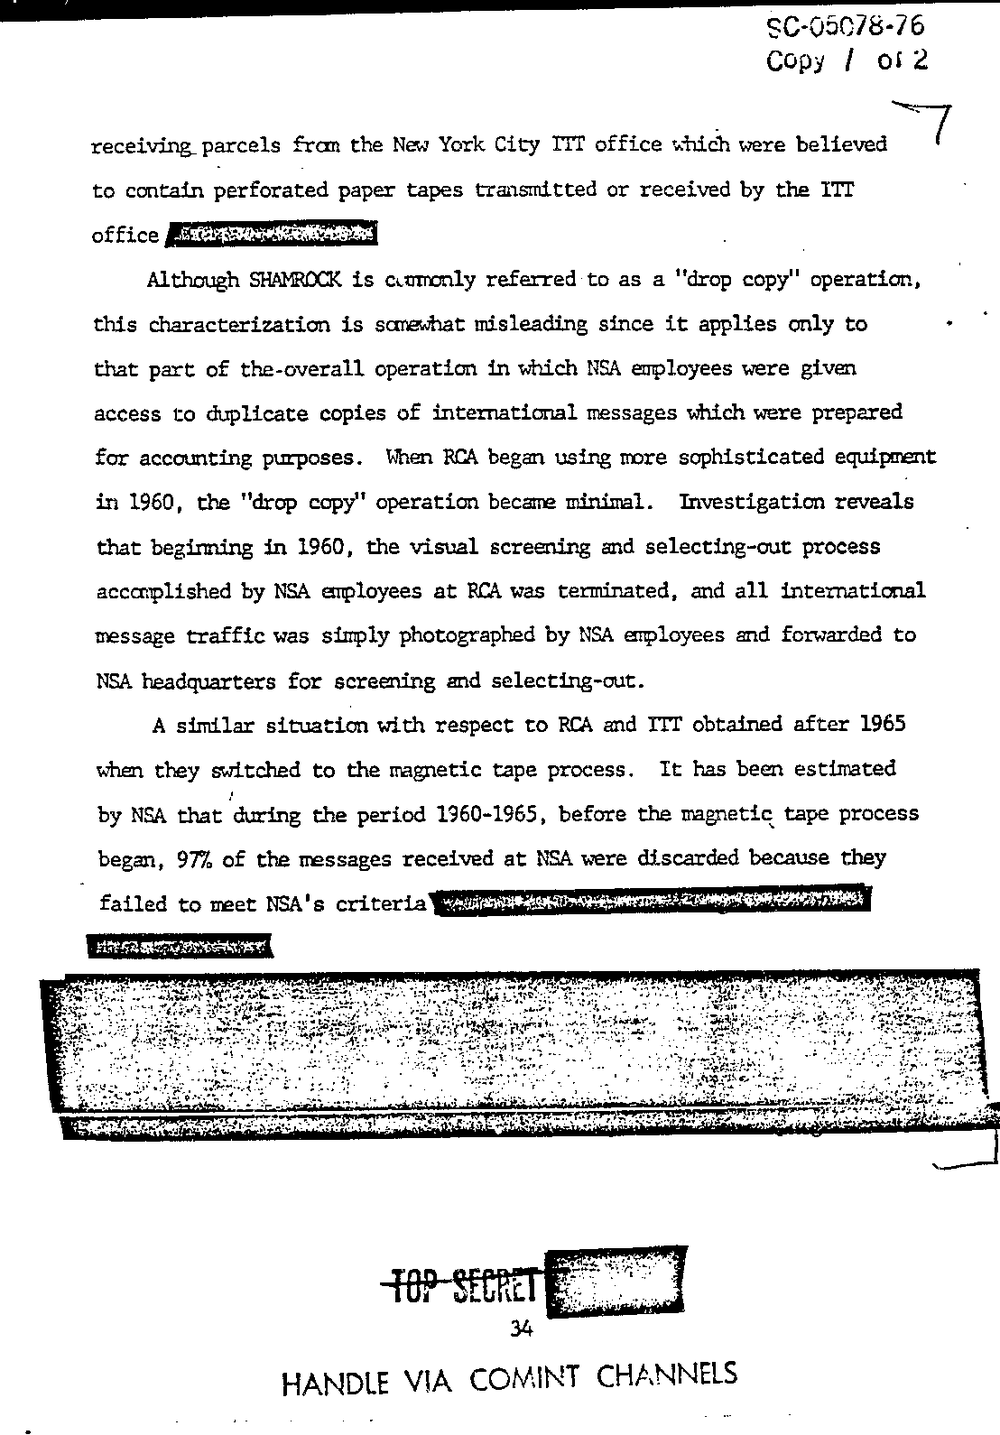 Page 42 from Report on Inquiry Into CIA Related Electronic Surveillance Activities